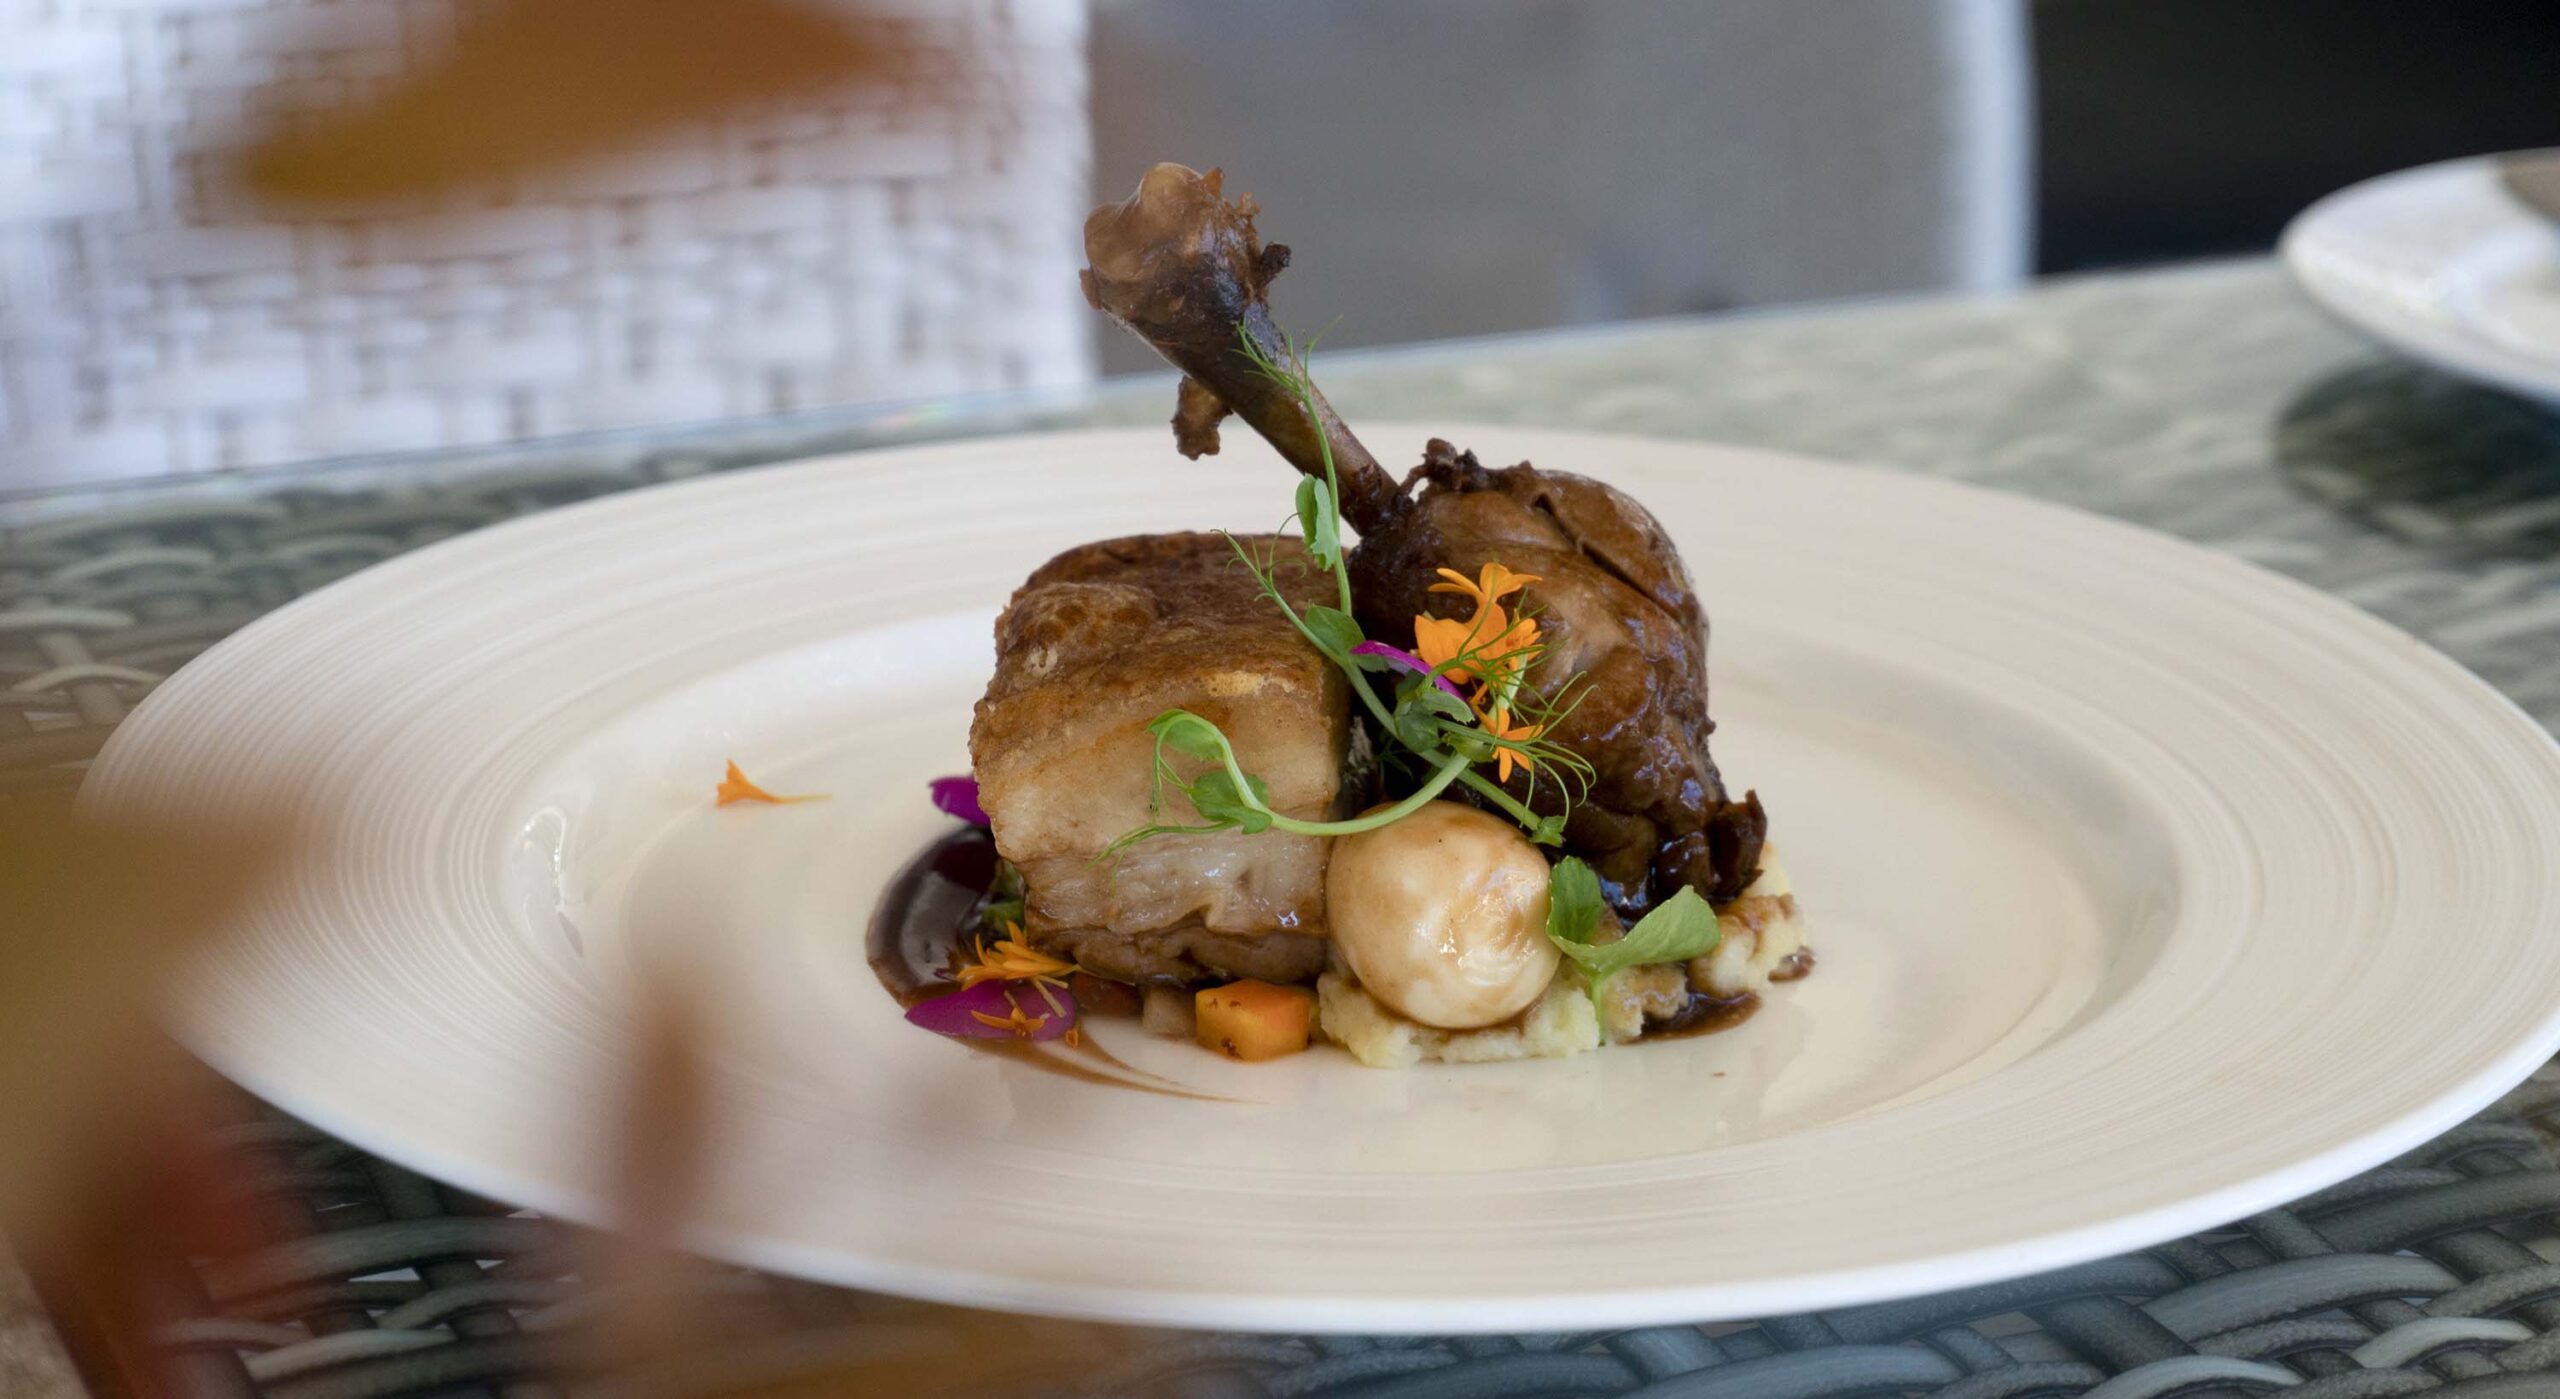 The classic Filipino dish adobo displayed on a dish in Atmosphere resort's kitchen in the Philippines